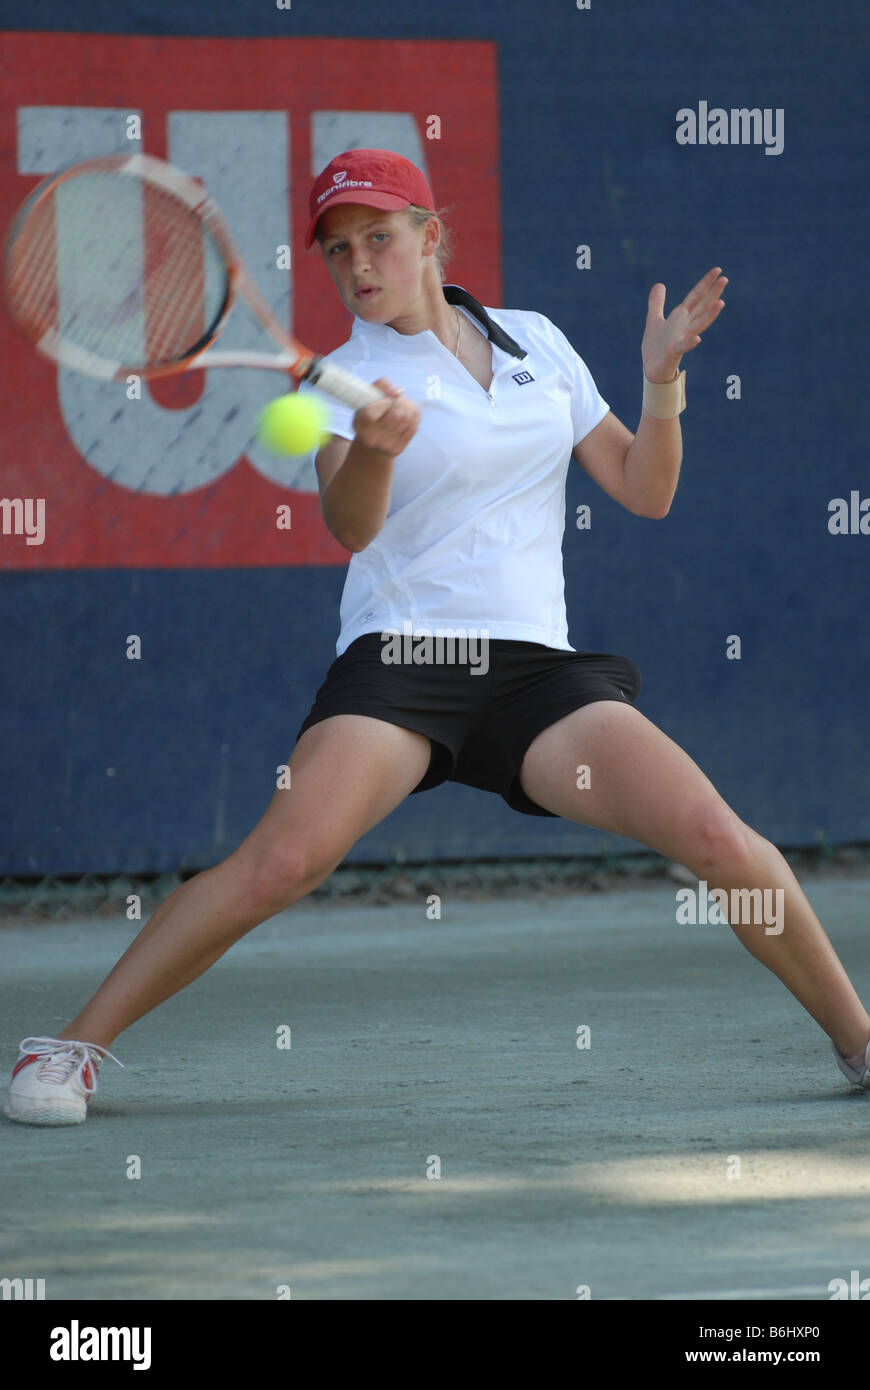 Itf Tennis High Resolution Stock Photography and Images - Alamy